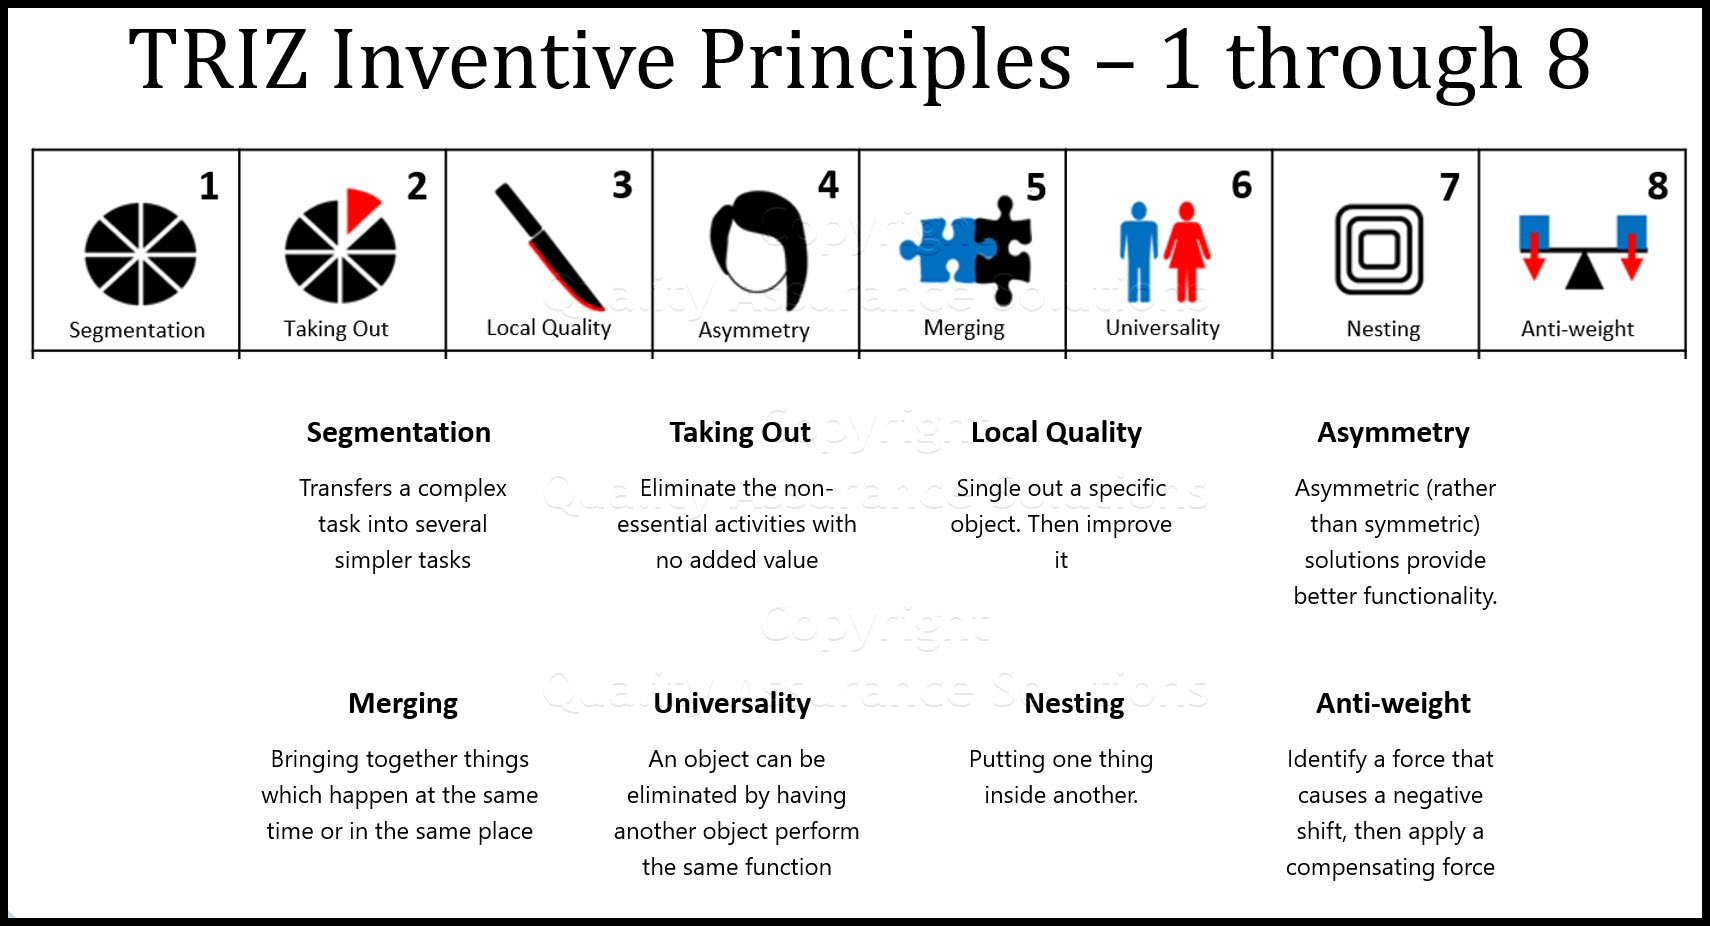 With these Triz inventive Principles we cover Segmentation, Taking Out, Local Quality, Asymmetry, Merging, Universality, Nesting, and Anti-weight 